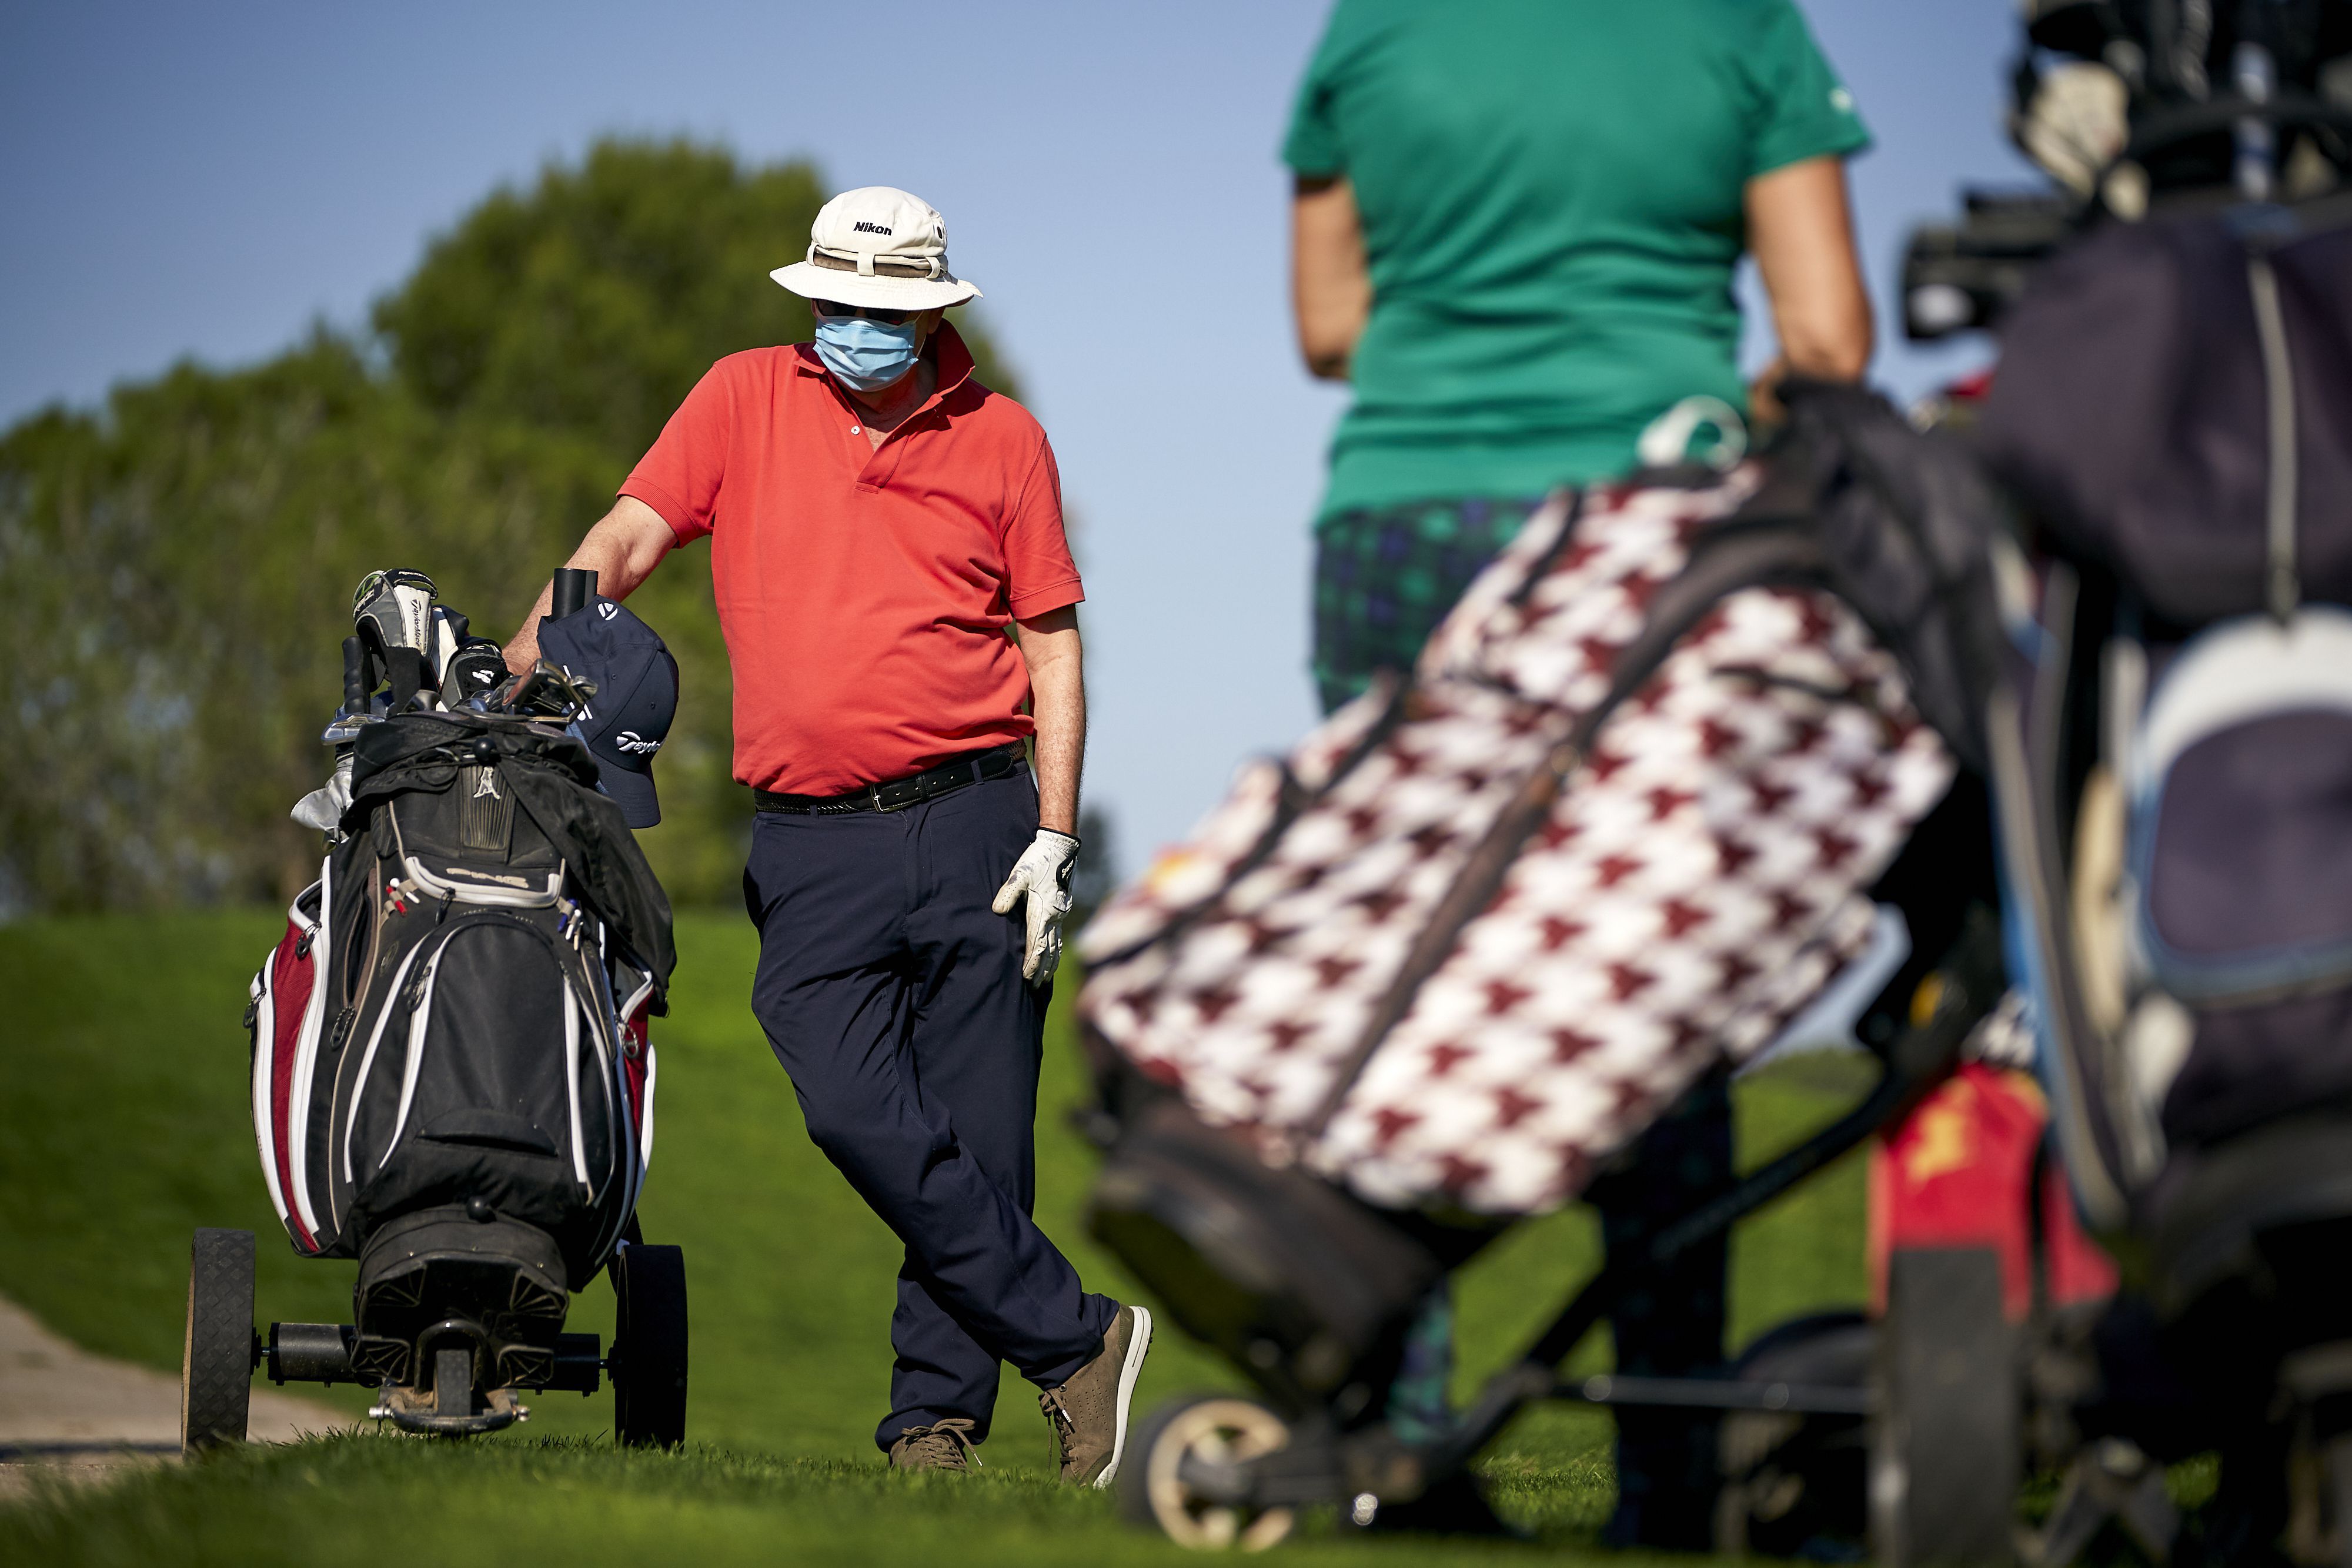 Golfers with pushcarts